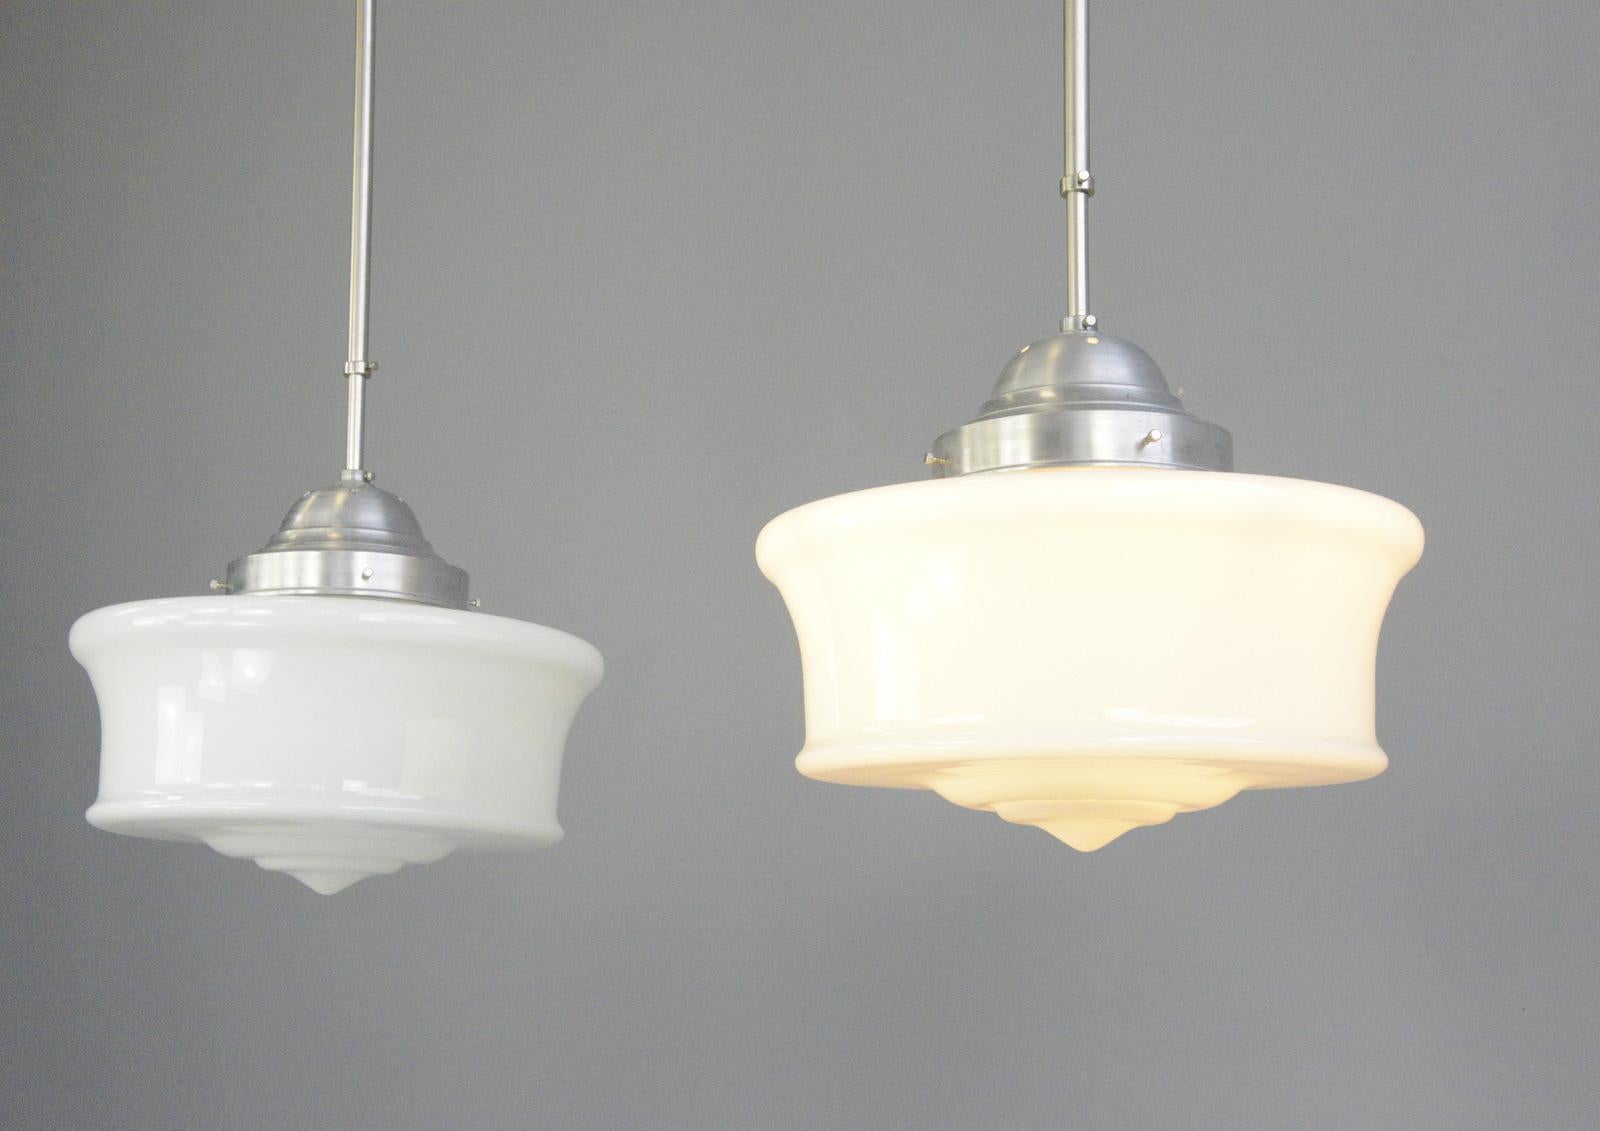 Large opaline pendant lights Circa 1930s

- Price is per light (2 available)
- Thick opaline glass shades
- Height adjustable stems
- Takes E27 fitting bulbs
- Danish ~ 1930s
- 50cm wide x 46cm tall inc gallery
- 112cm tall with stem at its